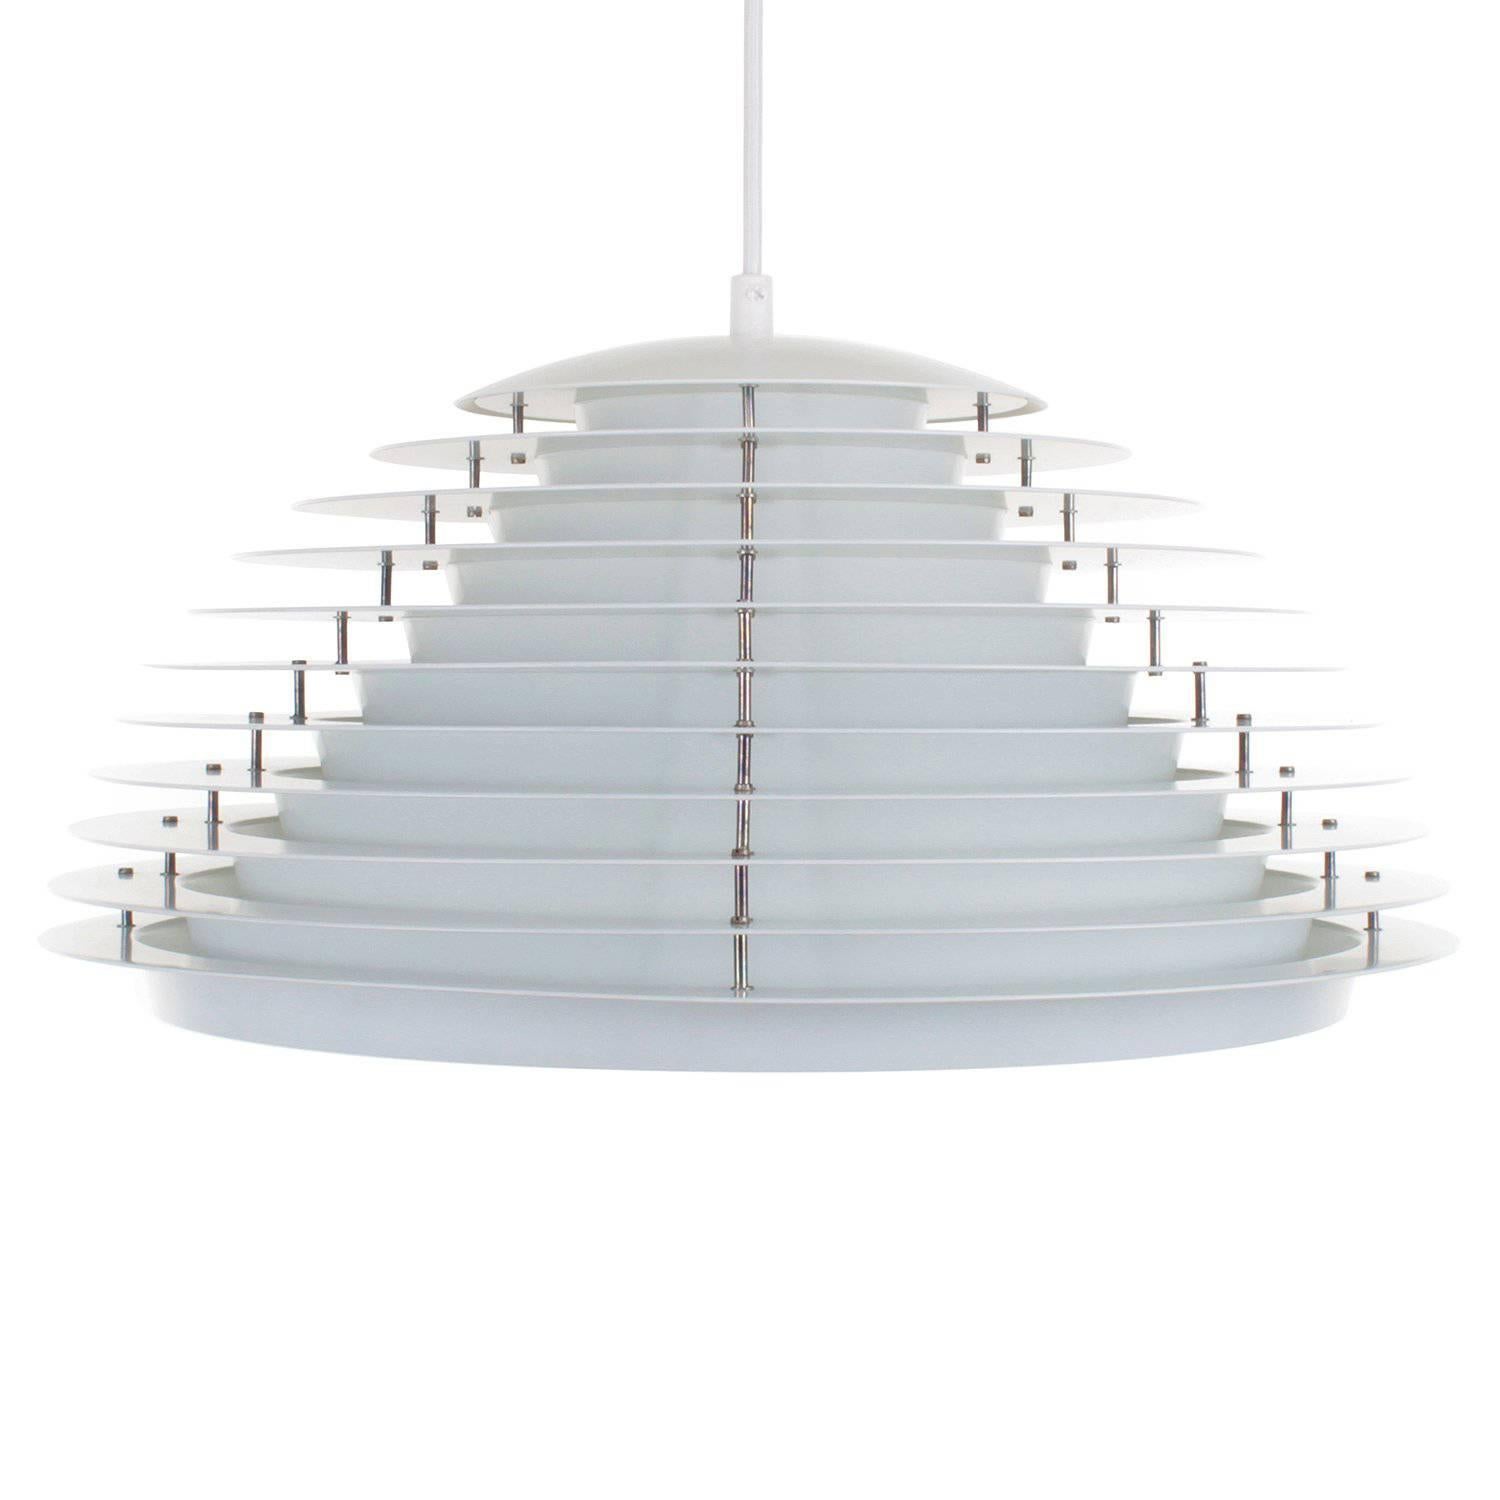 Hekla, White Pendant by Jon Olafsson and Petur B Luthersson, Fog & Mørup, 1962 For Sale